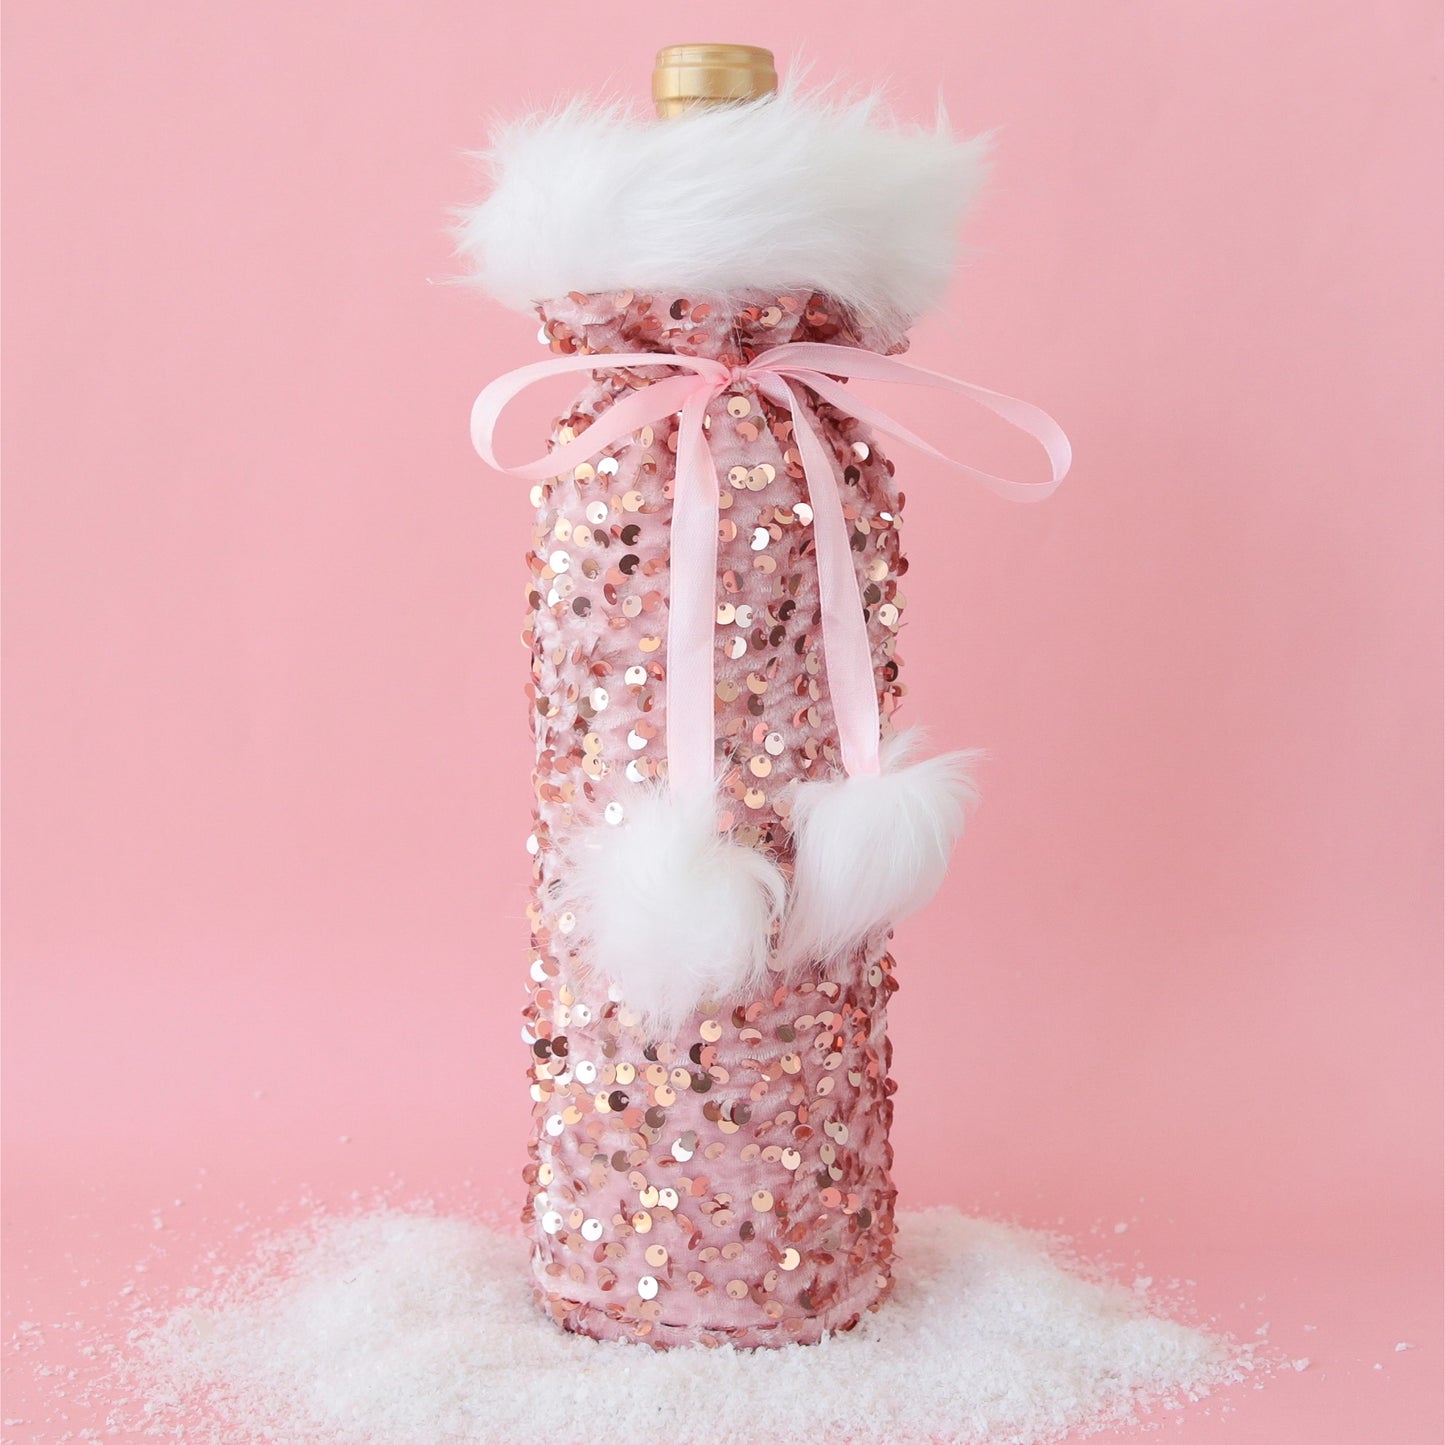 On a pink background is a pink sequin wine gift bag with fuzzy white details and a pom pom pink bow.